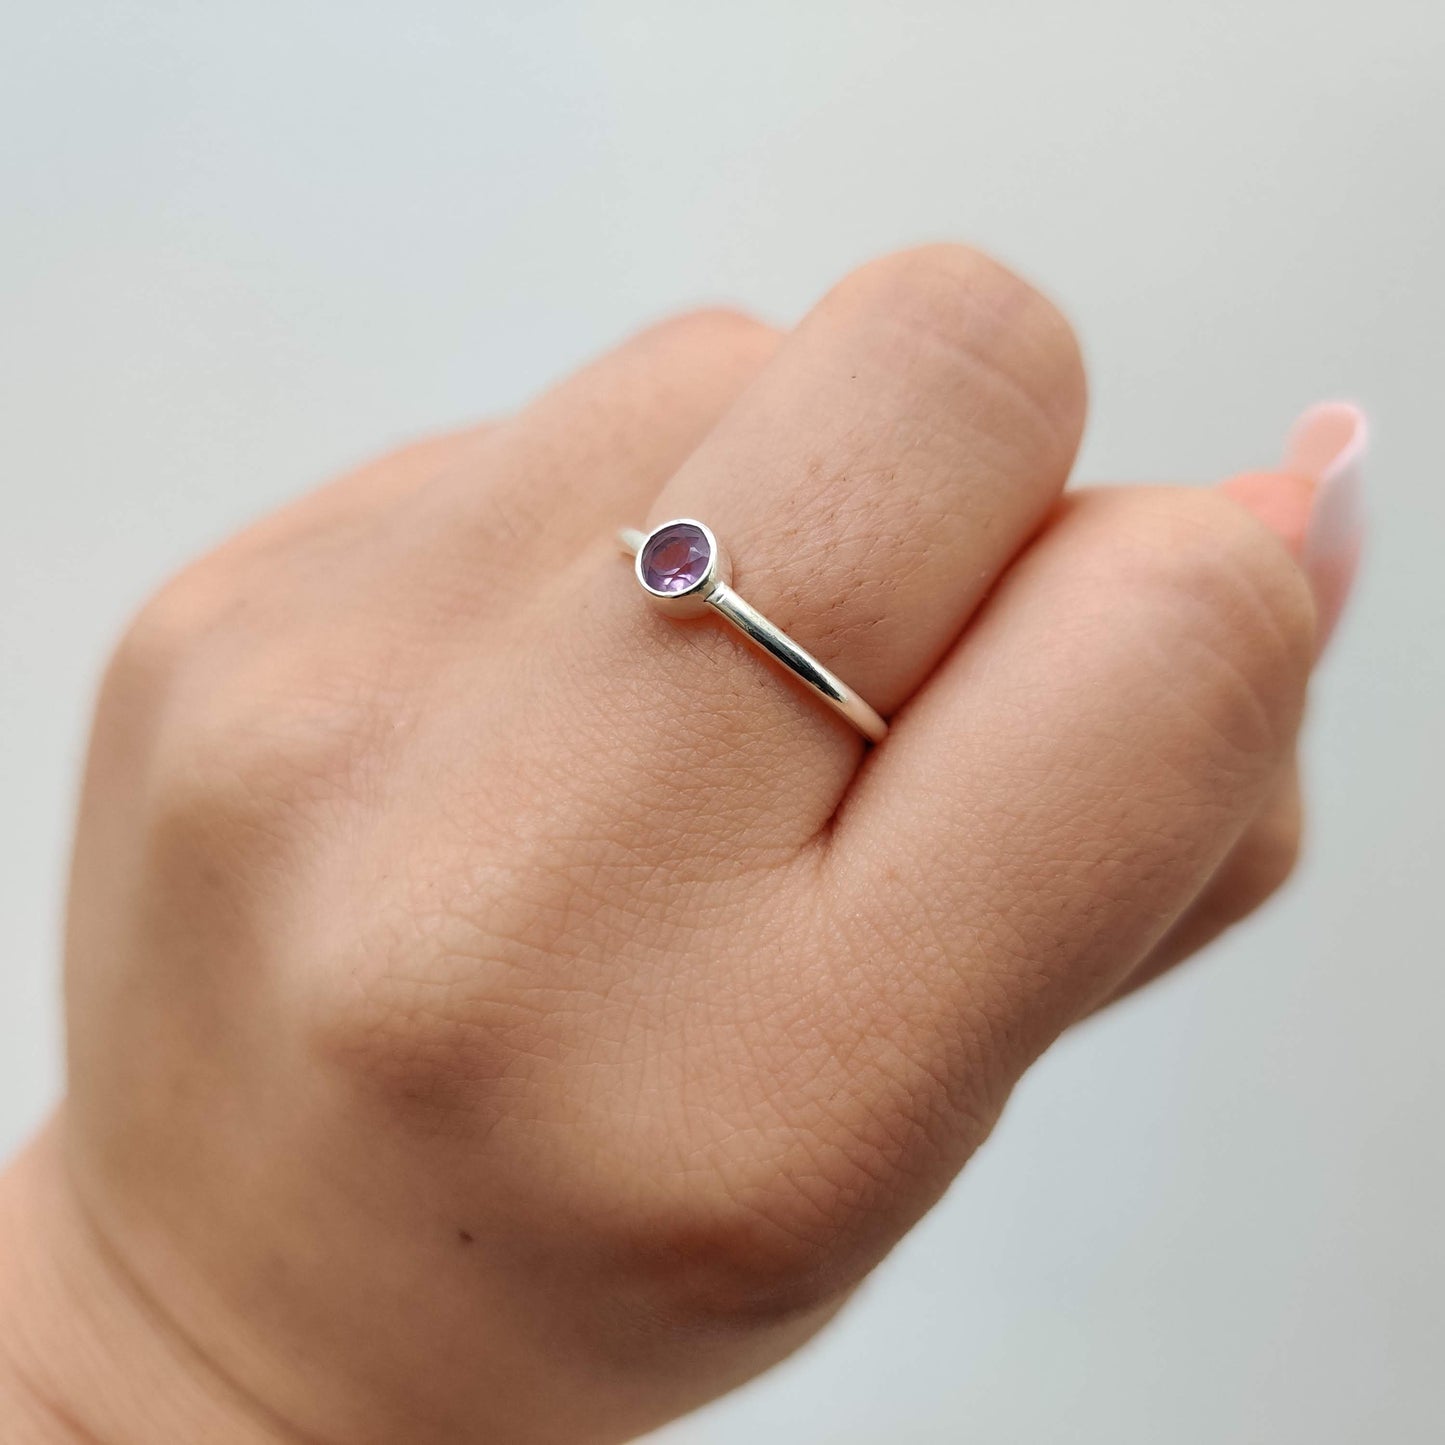 Amethyst Delicate 925 Sterling Silver Ring - Rivendell Shop